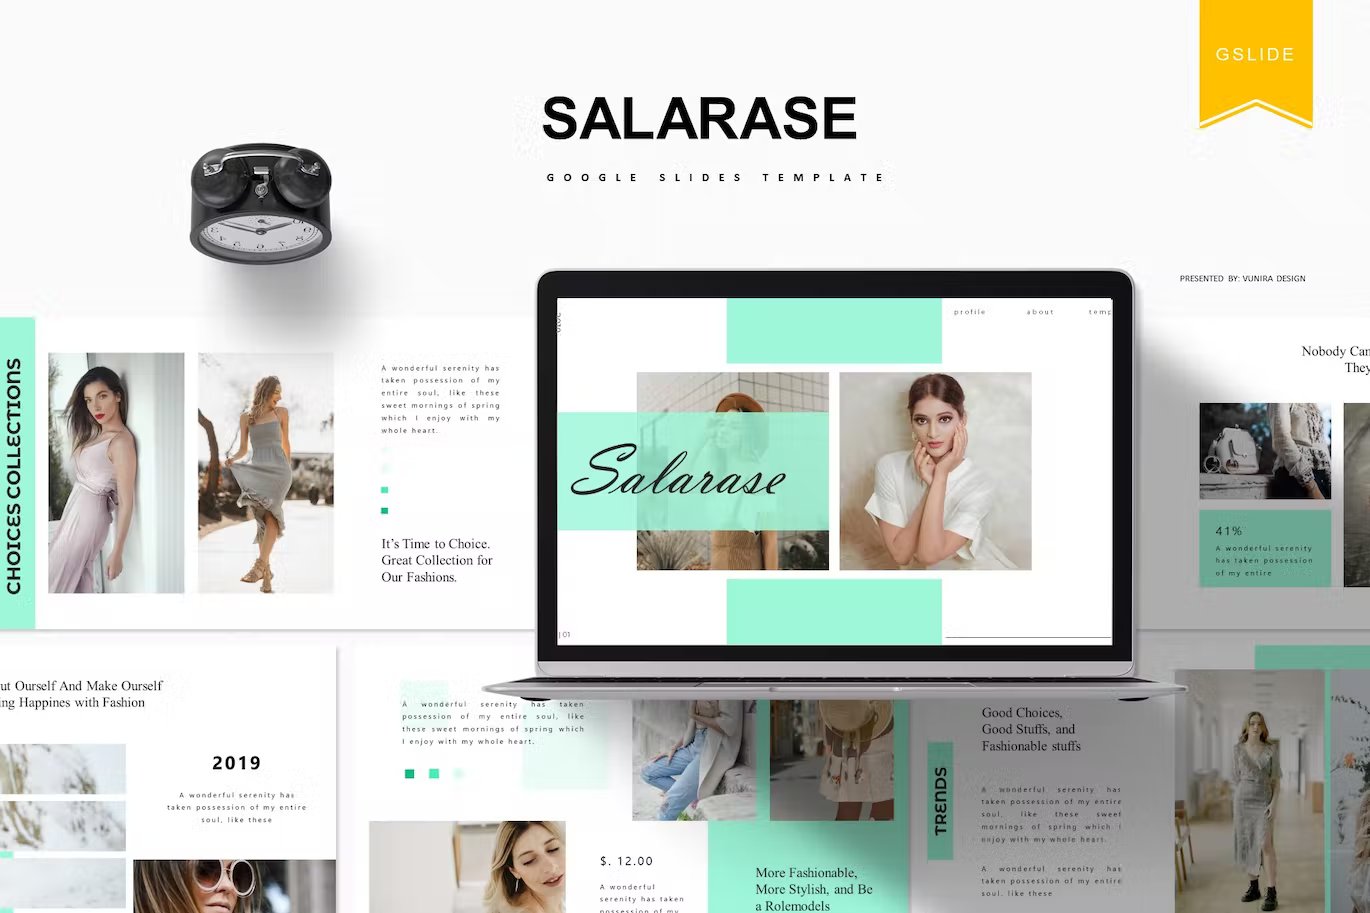 Black lettering "Salarase Google Slides Template" and different templates on a gray background.